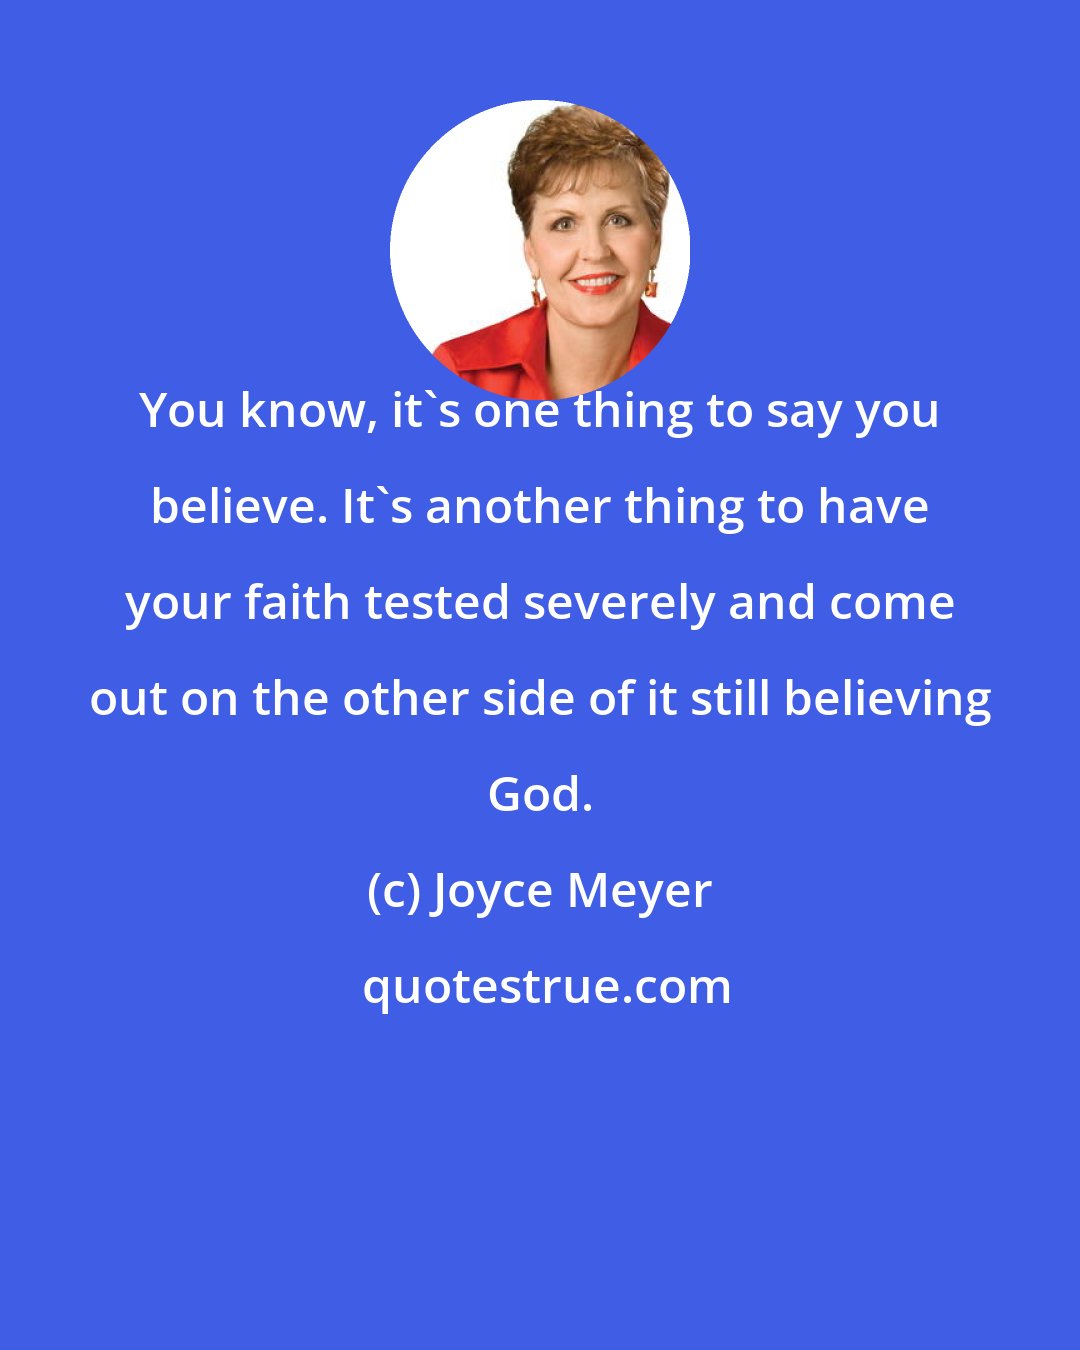 Joyce Meyer: You know, it's one thing to say you believe. It's another thing to have your faith tested severely and come out on the other side of it still believing God.